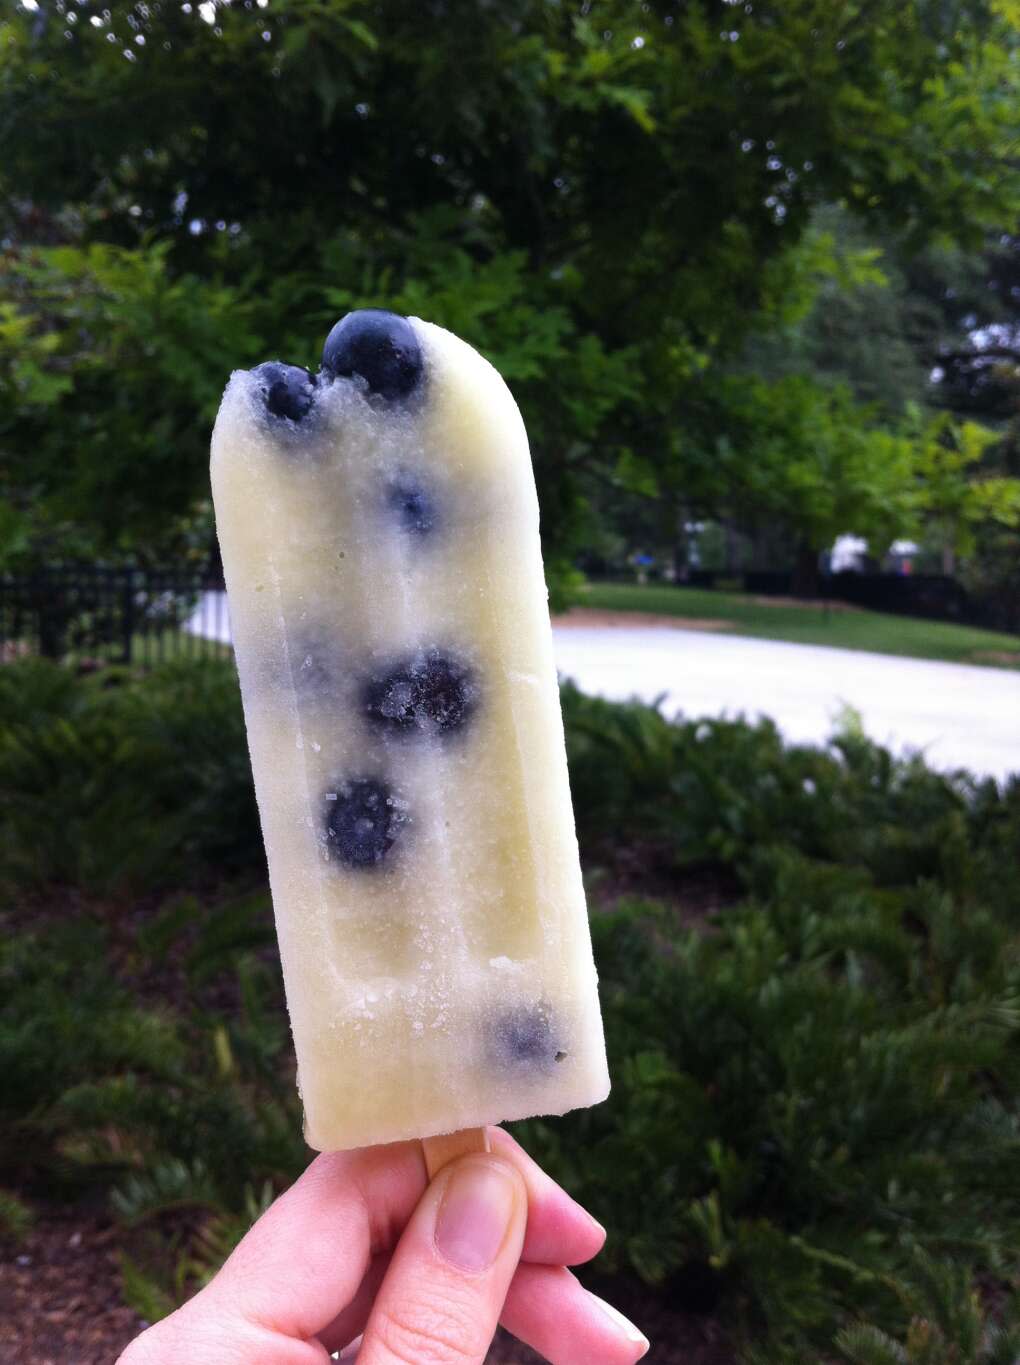 Florida desserts: popsicle from The Hyppo